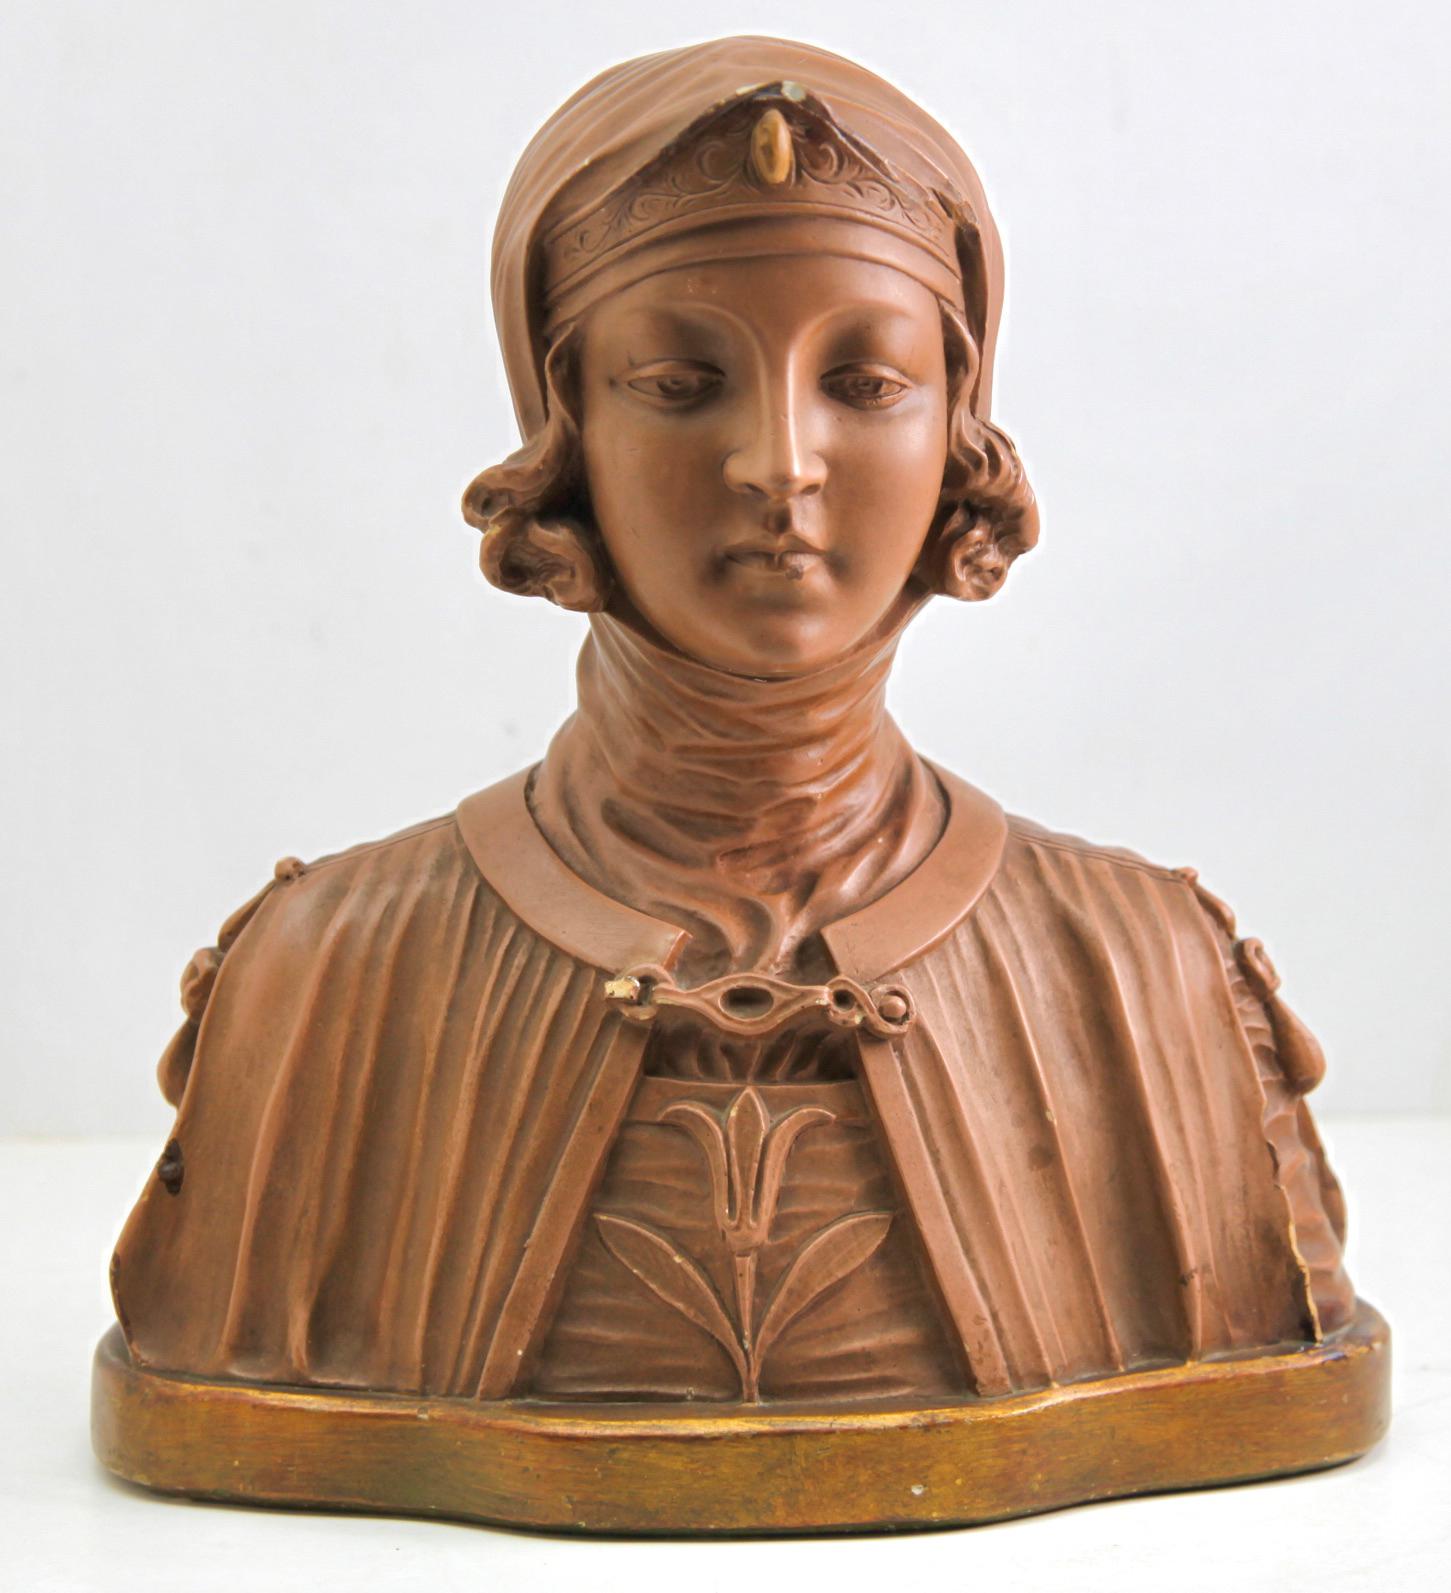 Art Nouveau 'Plaster' Detailed and Stylized Image of a Women's Buste
Beautifully Detailed
1935, France Signed: Depose C.G.390

The Buste is in good condition with a nice age patina. 
With tiny losses to the Plaster see Picture

With best